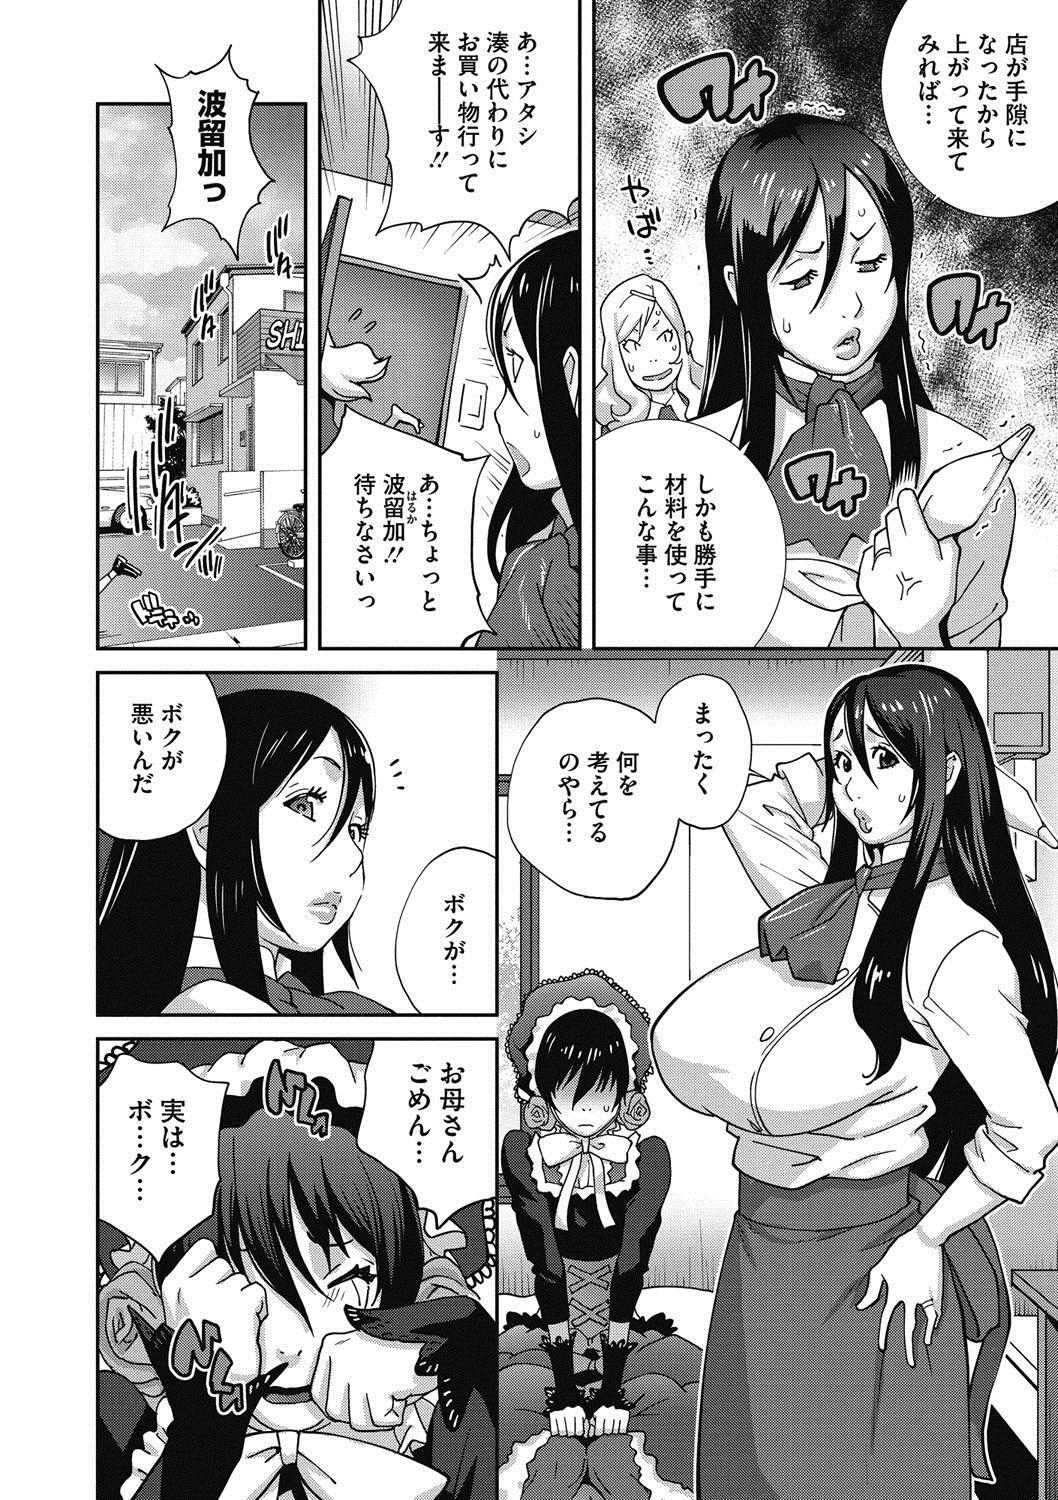 [Kotoyoshi Yumisuke] Haha to Ane to Aoi Ichigo no Fromage - Fromage of mother and an older sister and a blue strawberry Ch. 1-4 9